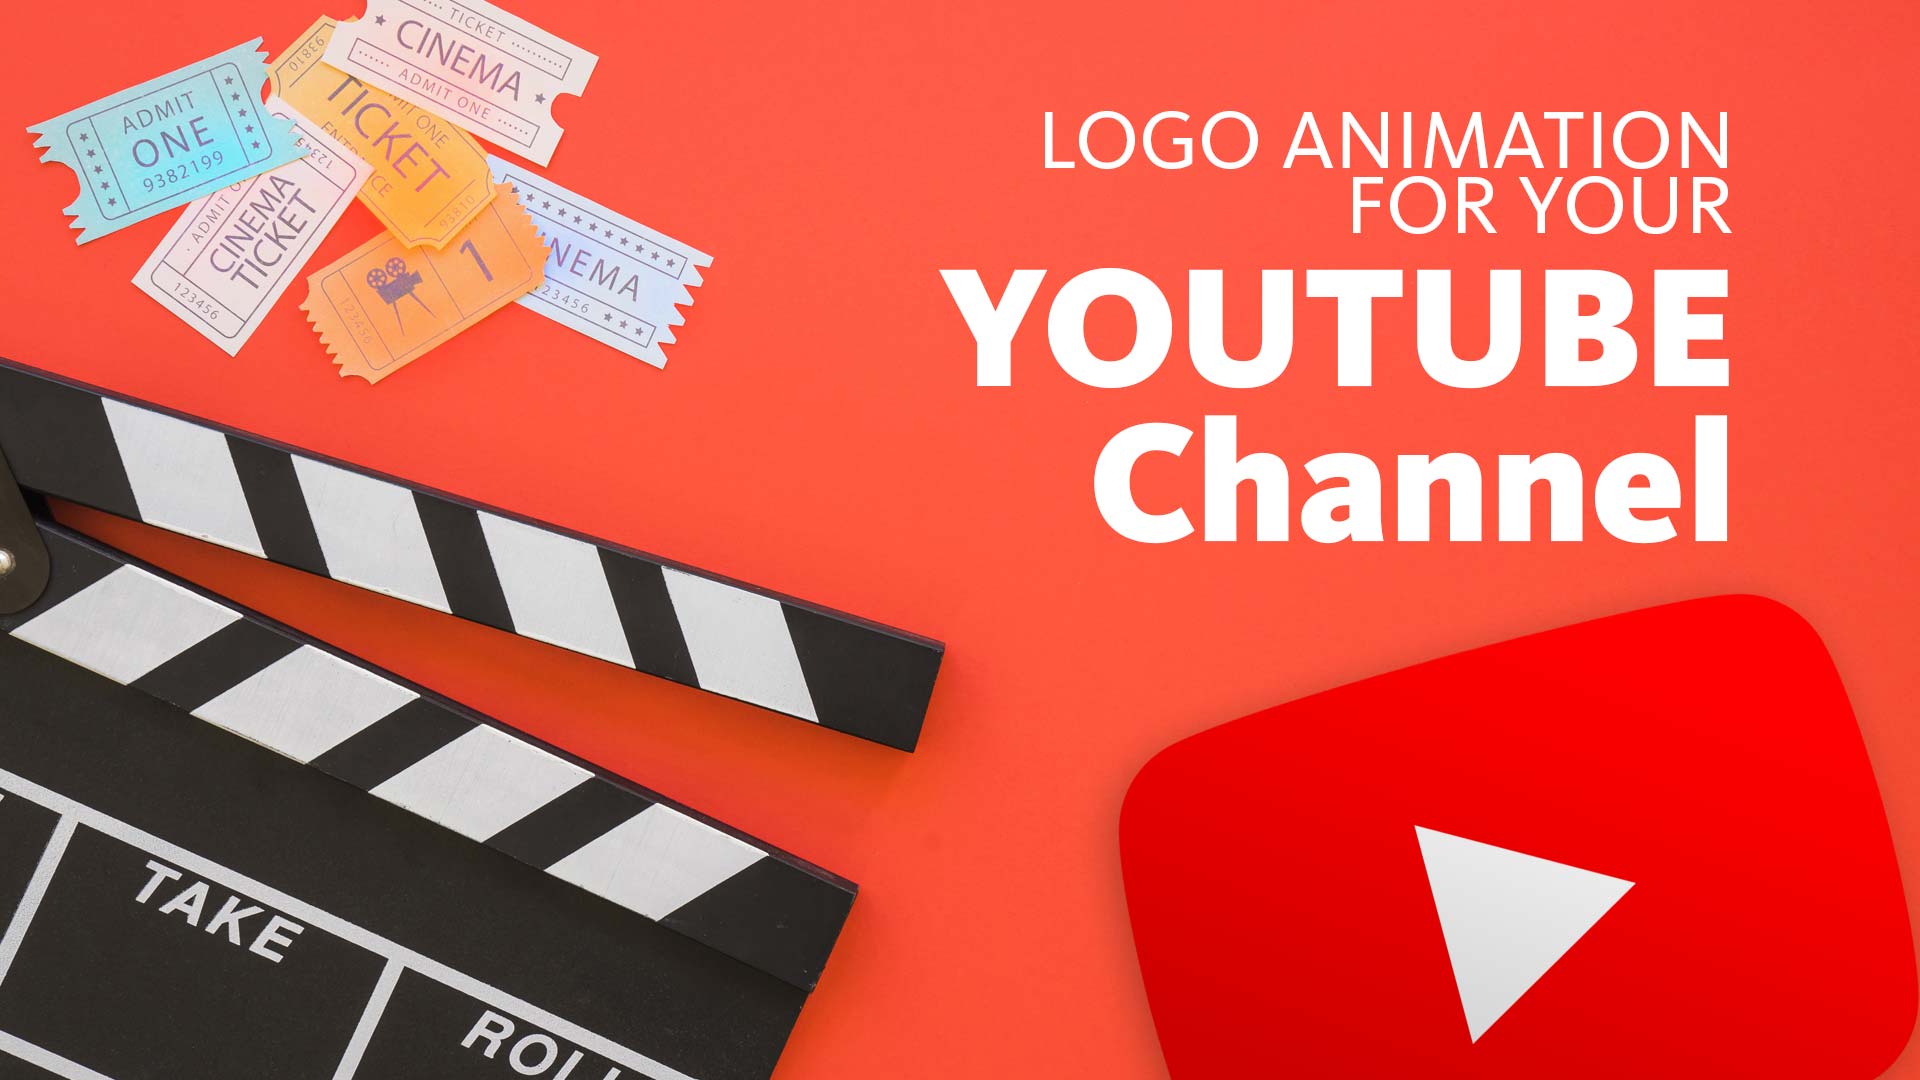 How To Make A Youtube Logo Intro Animation - Paid vs Free Options? - Quince  Creative